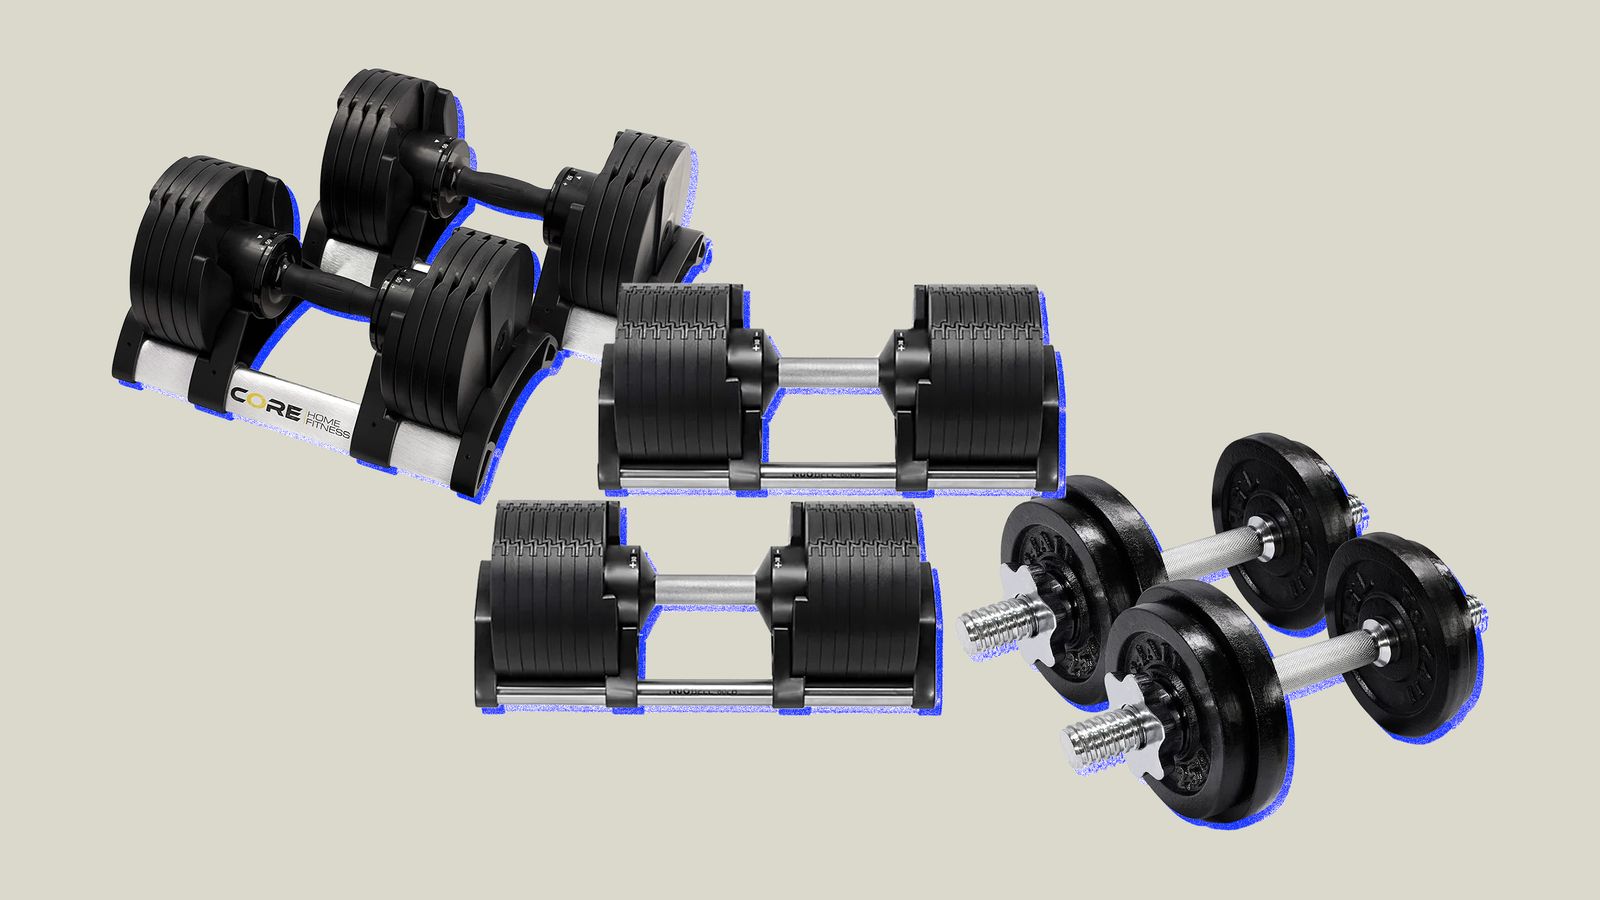 The Best Adjustable Dumbbells for Getting Swole at Home